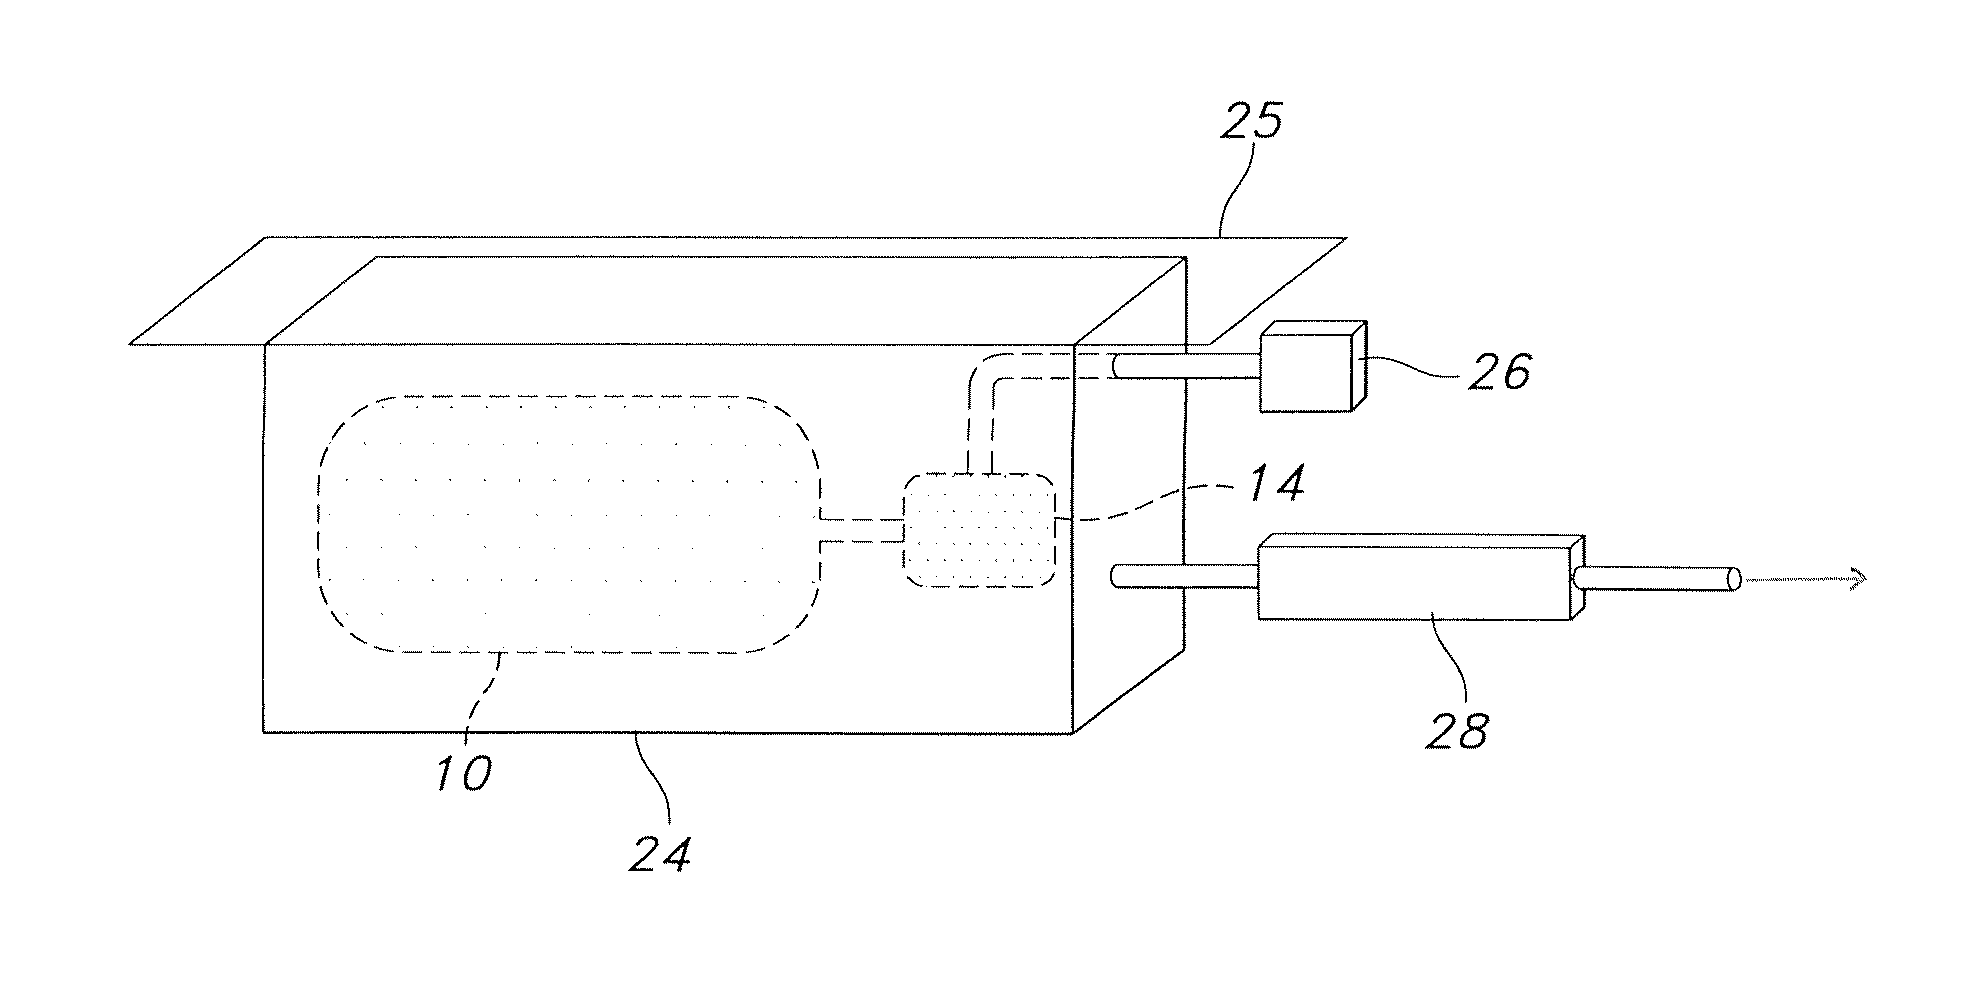 Apparatus and method for the integrity testing of flexible containers